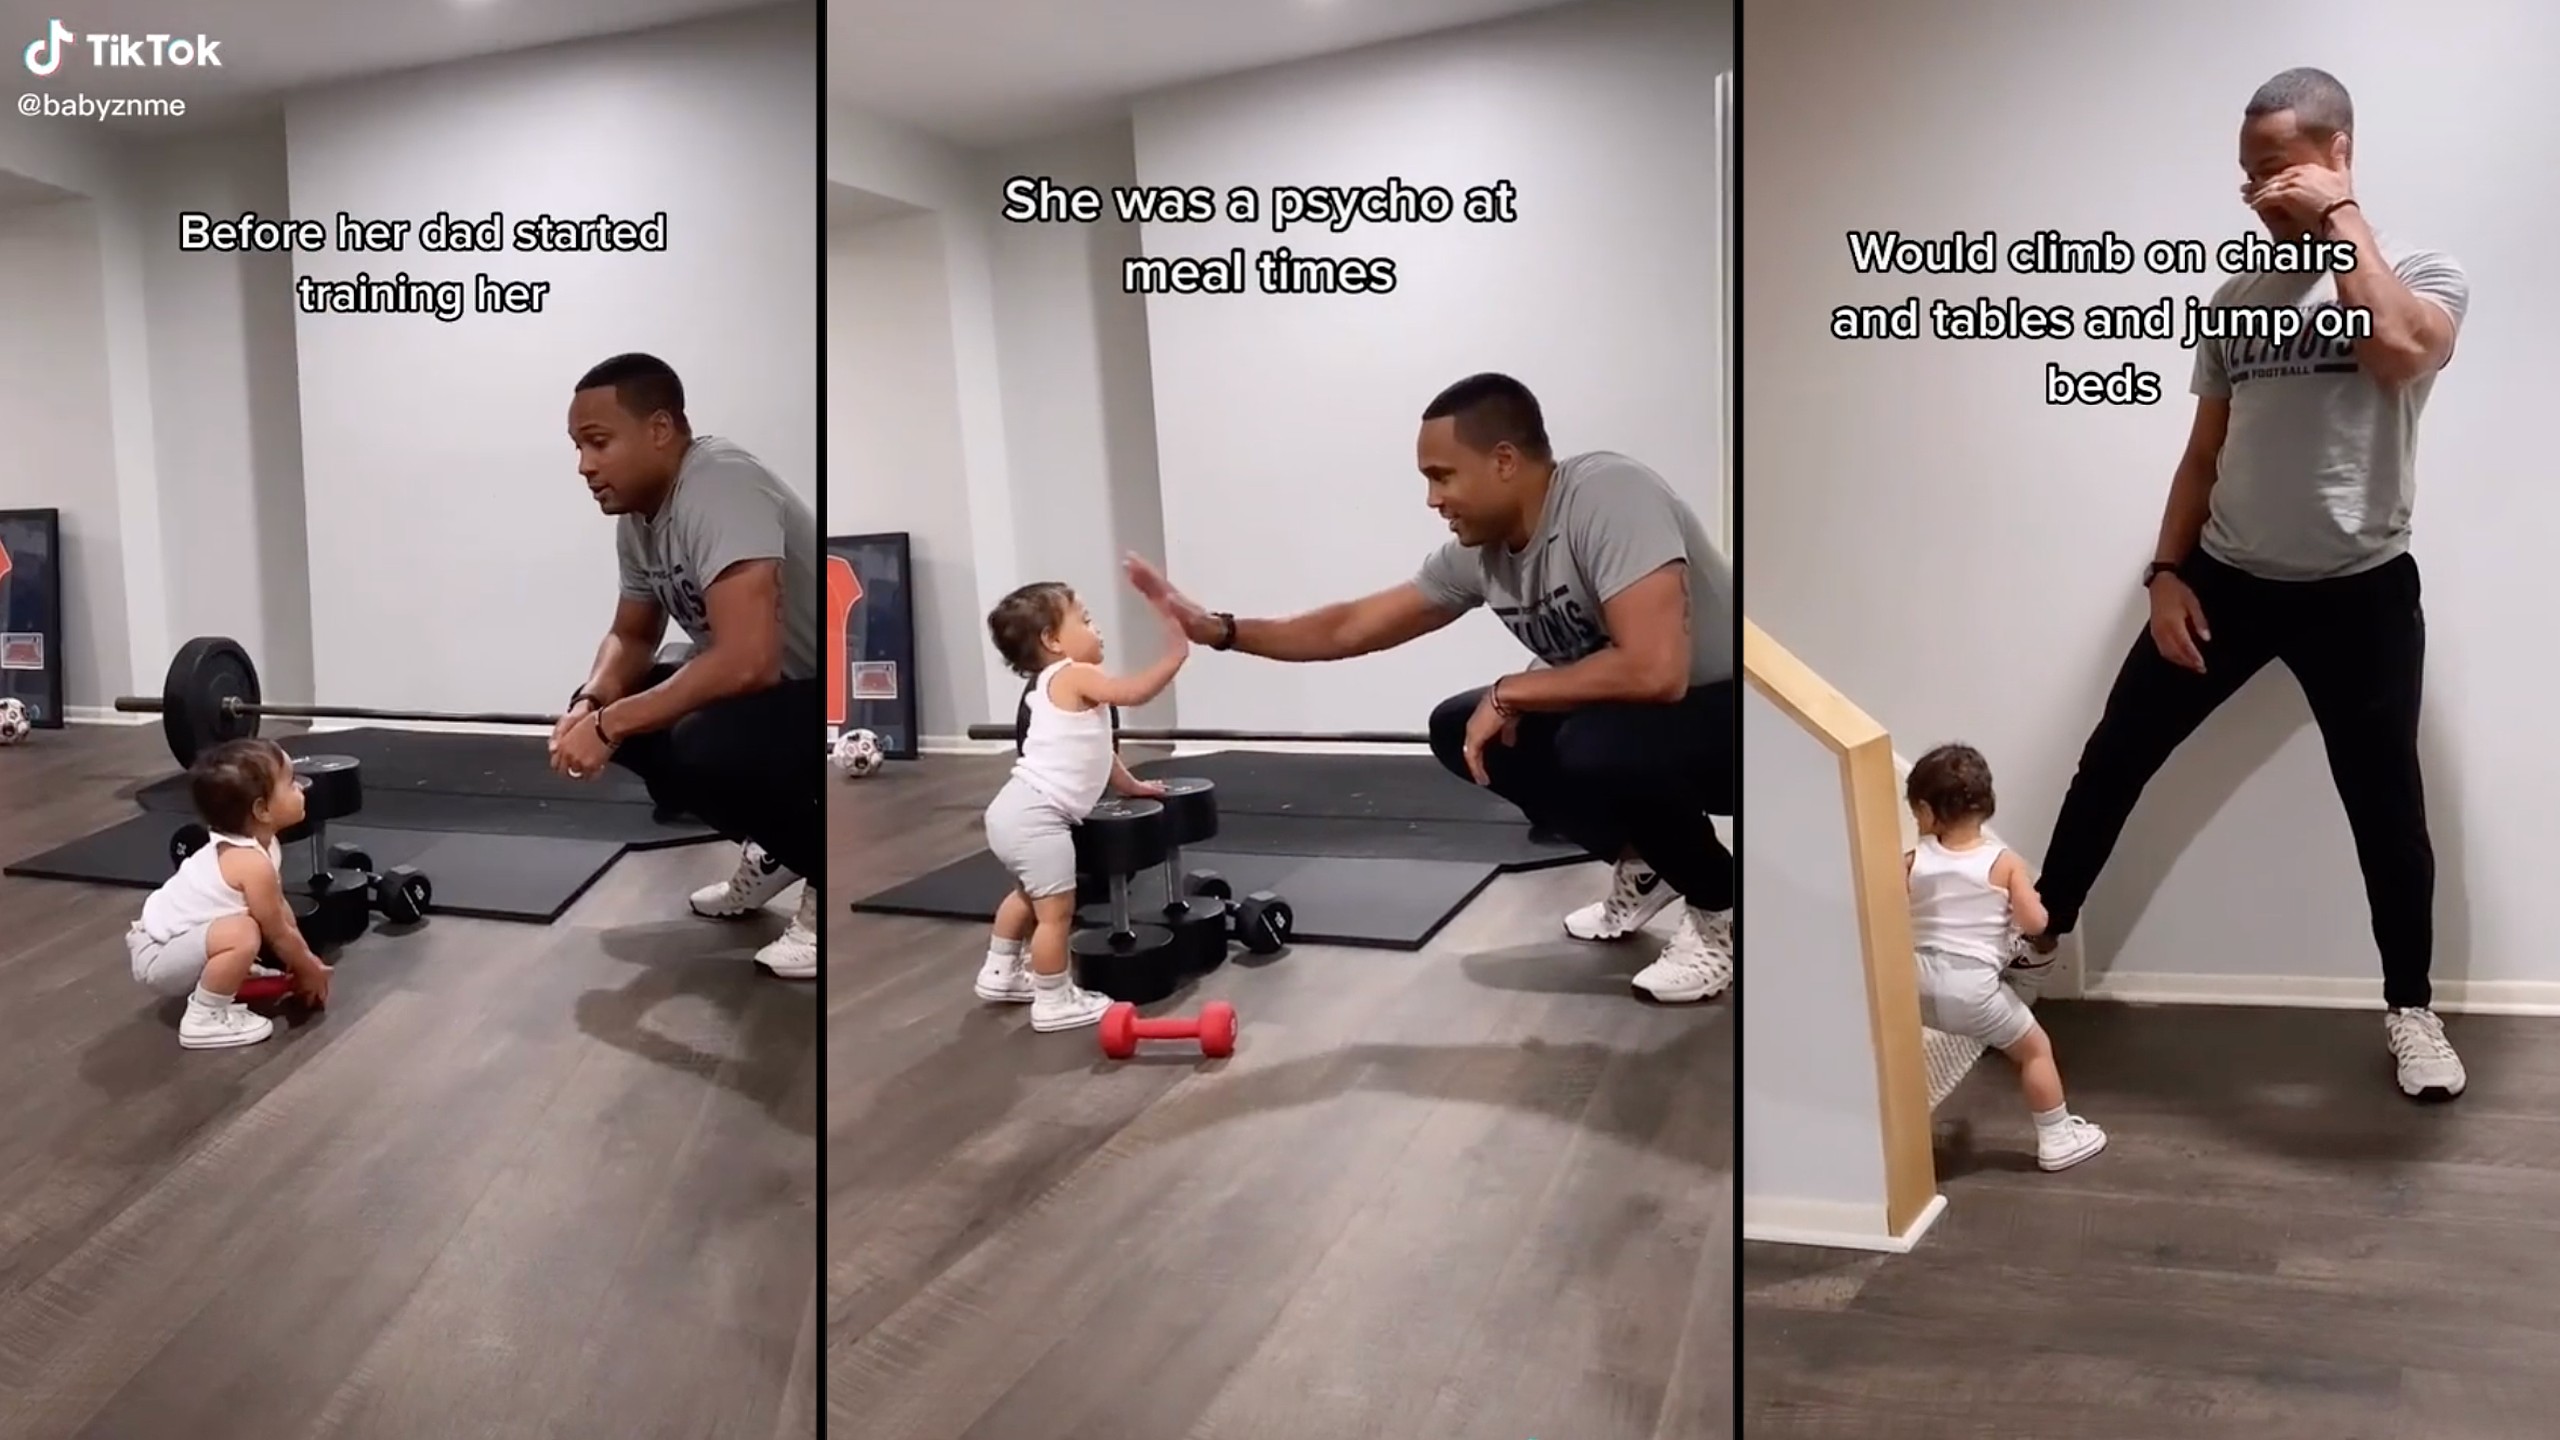 Dad and daughter adorably exercise together